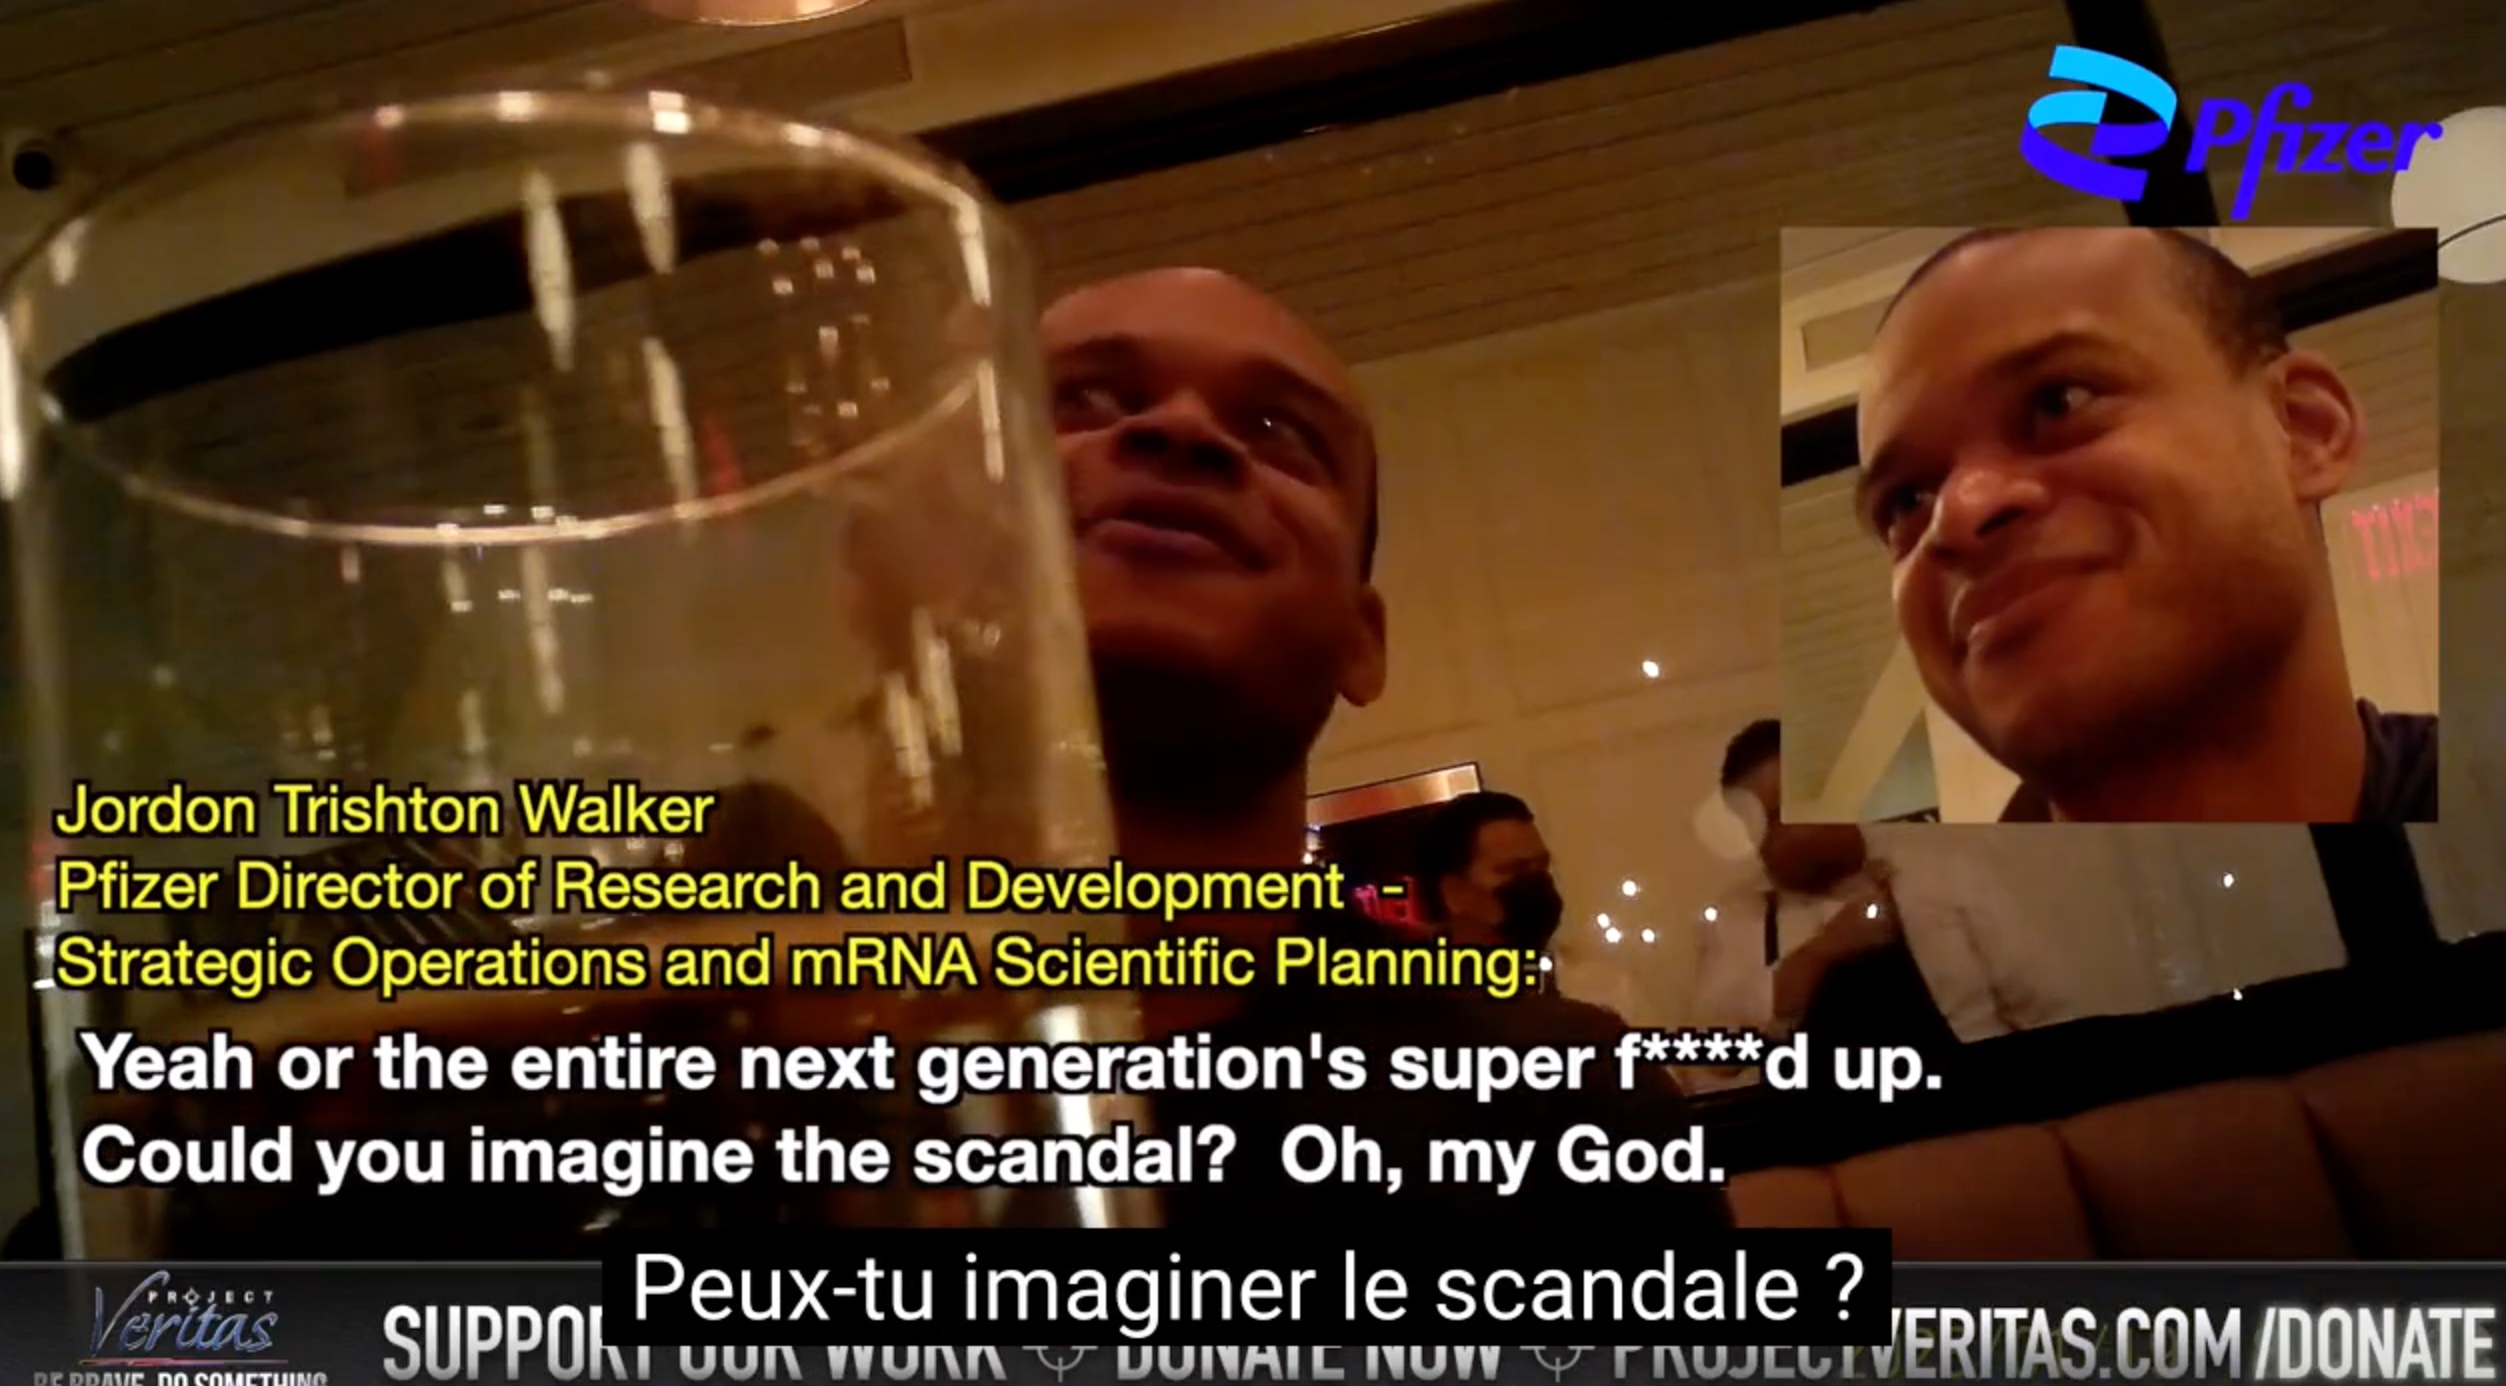 Project Veritas unveils a new video by Jordon Walker (Pfizer): “I hope that the mRNA does not persist in the body (…) Or all the future generation (would be) super screwed up.  Can you imagine the scandal?”